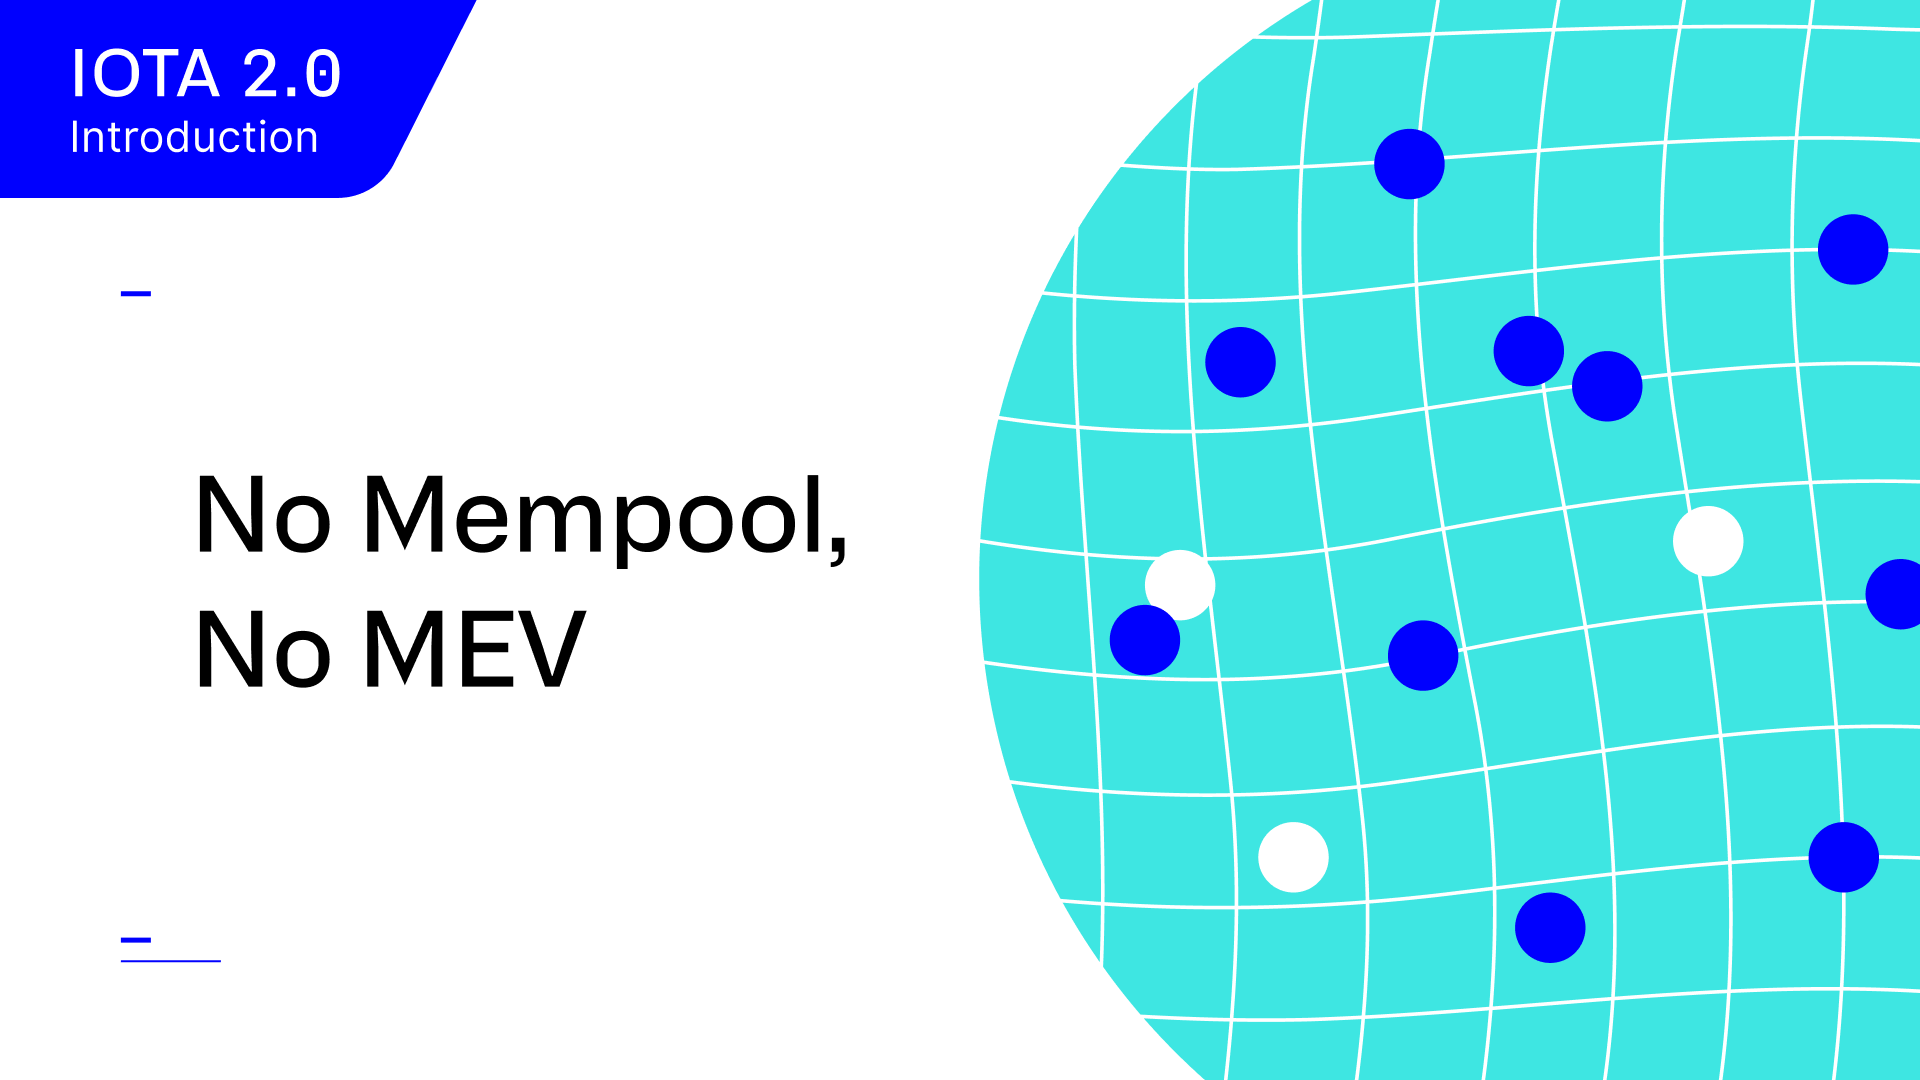 No Mempool, No MEV: Protecting Users Against Value Extraction